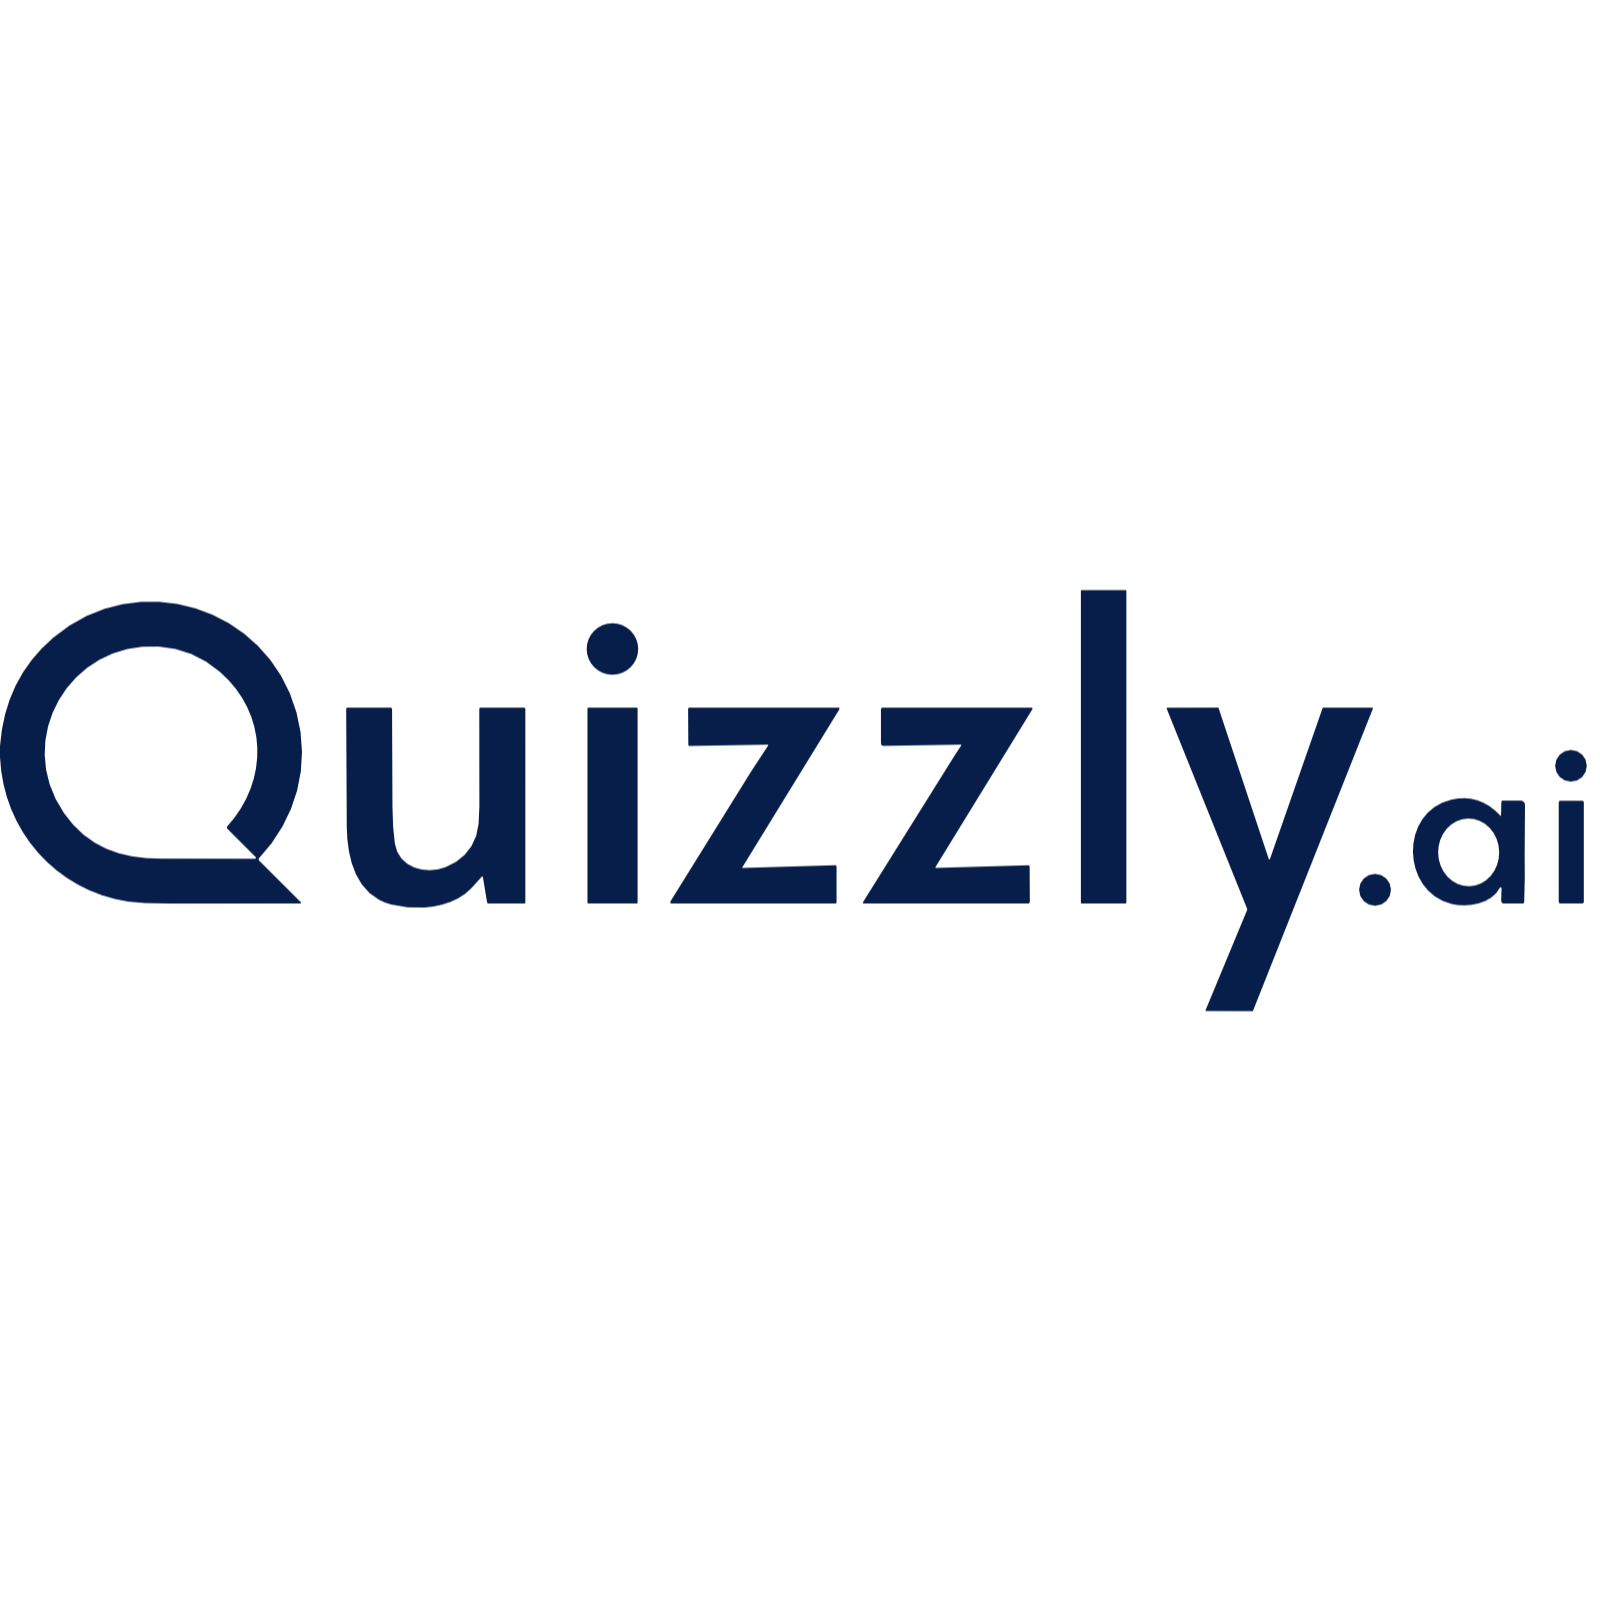 Cover image for  article: Quizzly.ai Partners with Advally to Automate First-Party Data Activation for Publishers